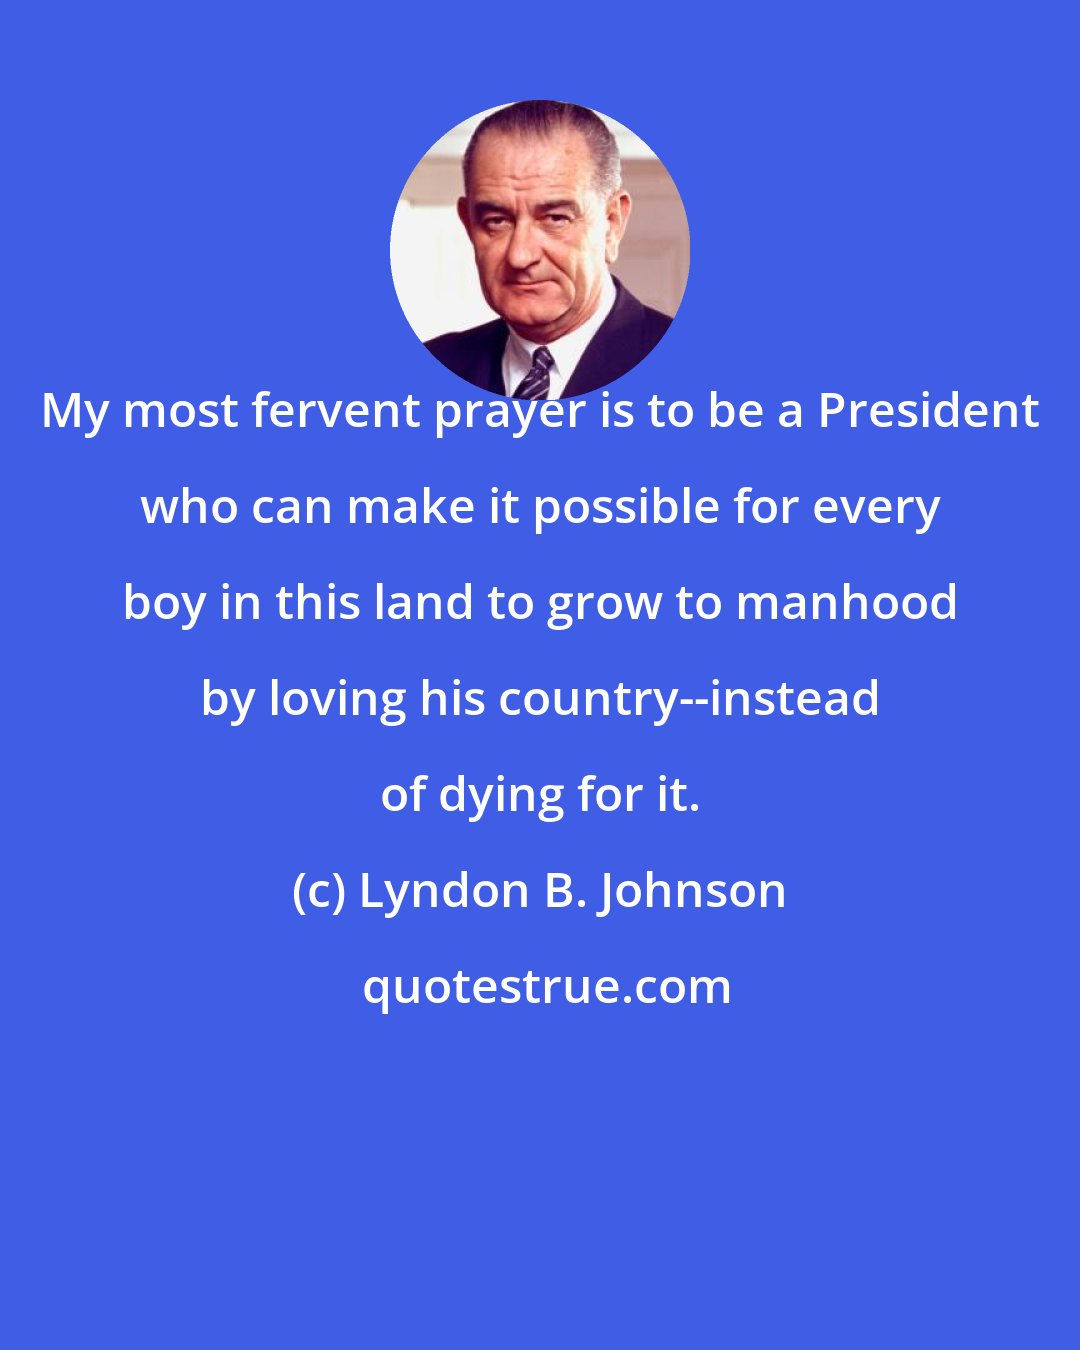 Lyndon B. Johnson: My most fervent prayer is to be a President who can make it possible for every boy in this land to grow to manhood by loving his country--instead of dying for it.